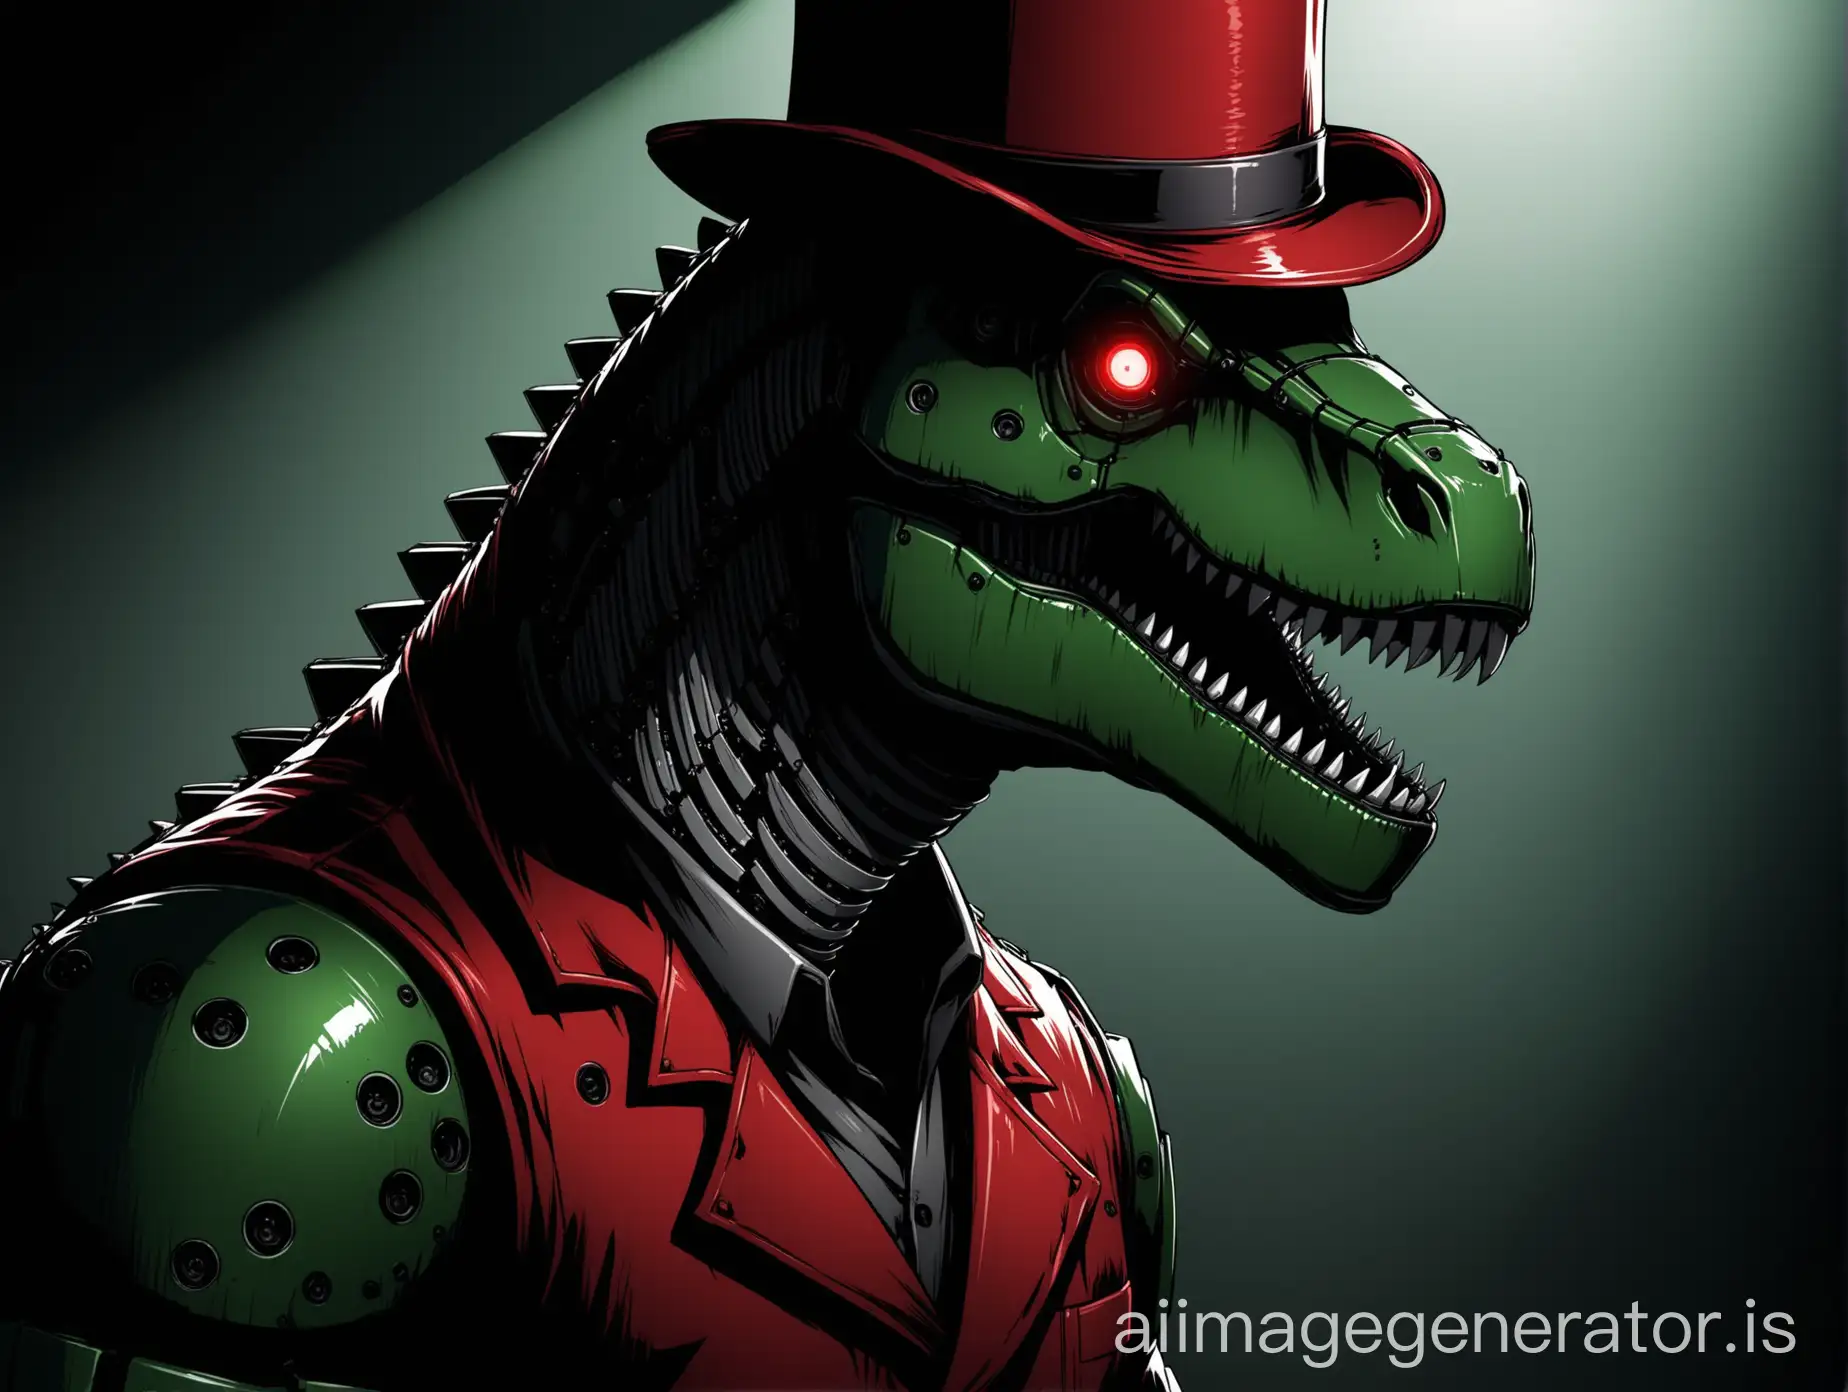 Eerie-Male-TRex-Animatronic-from-Five-Nights-at-Freddys-Holding-a-Book